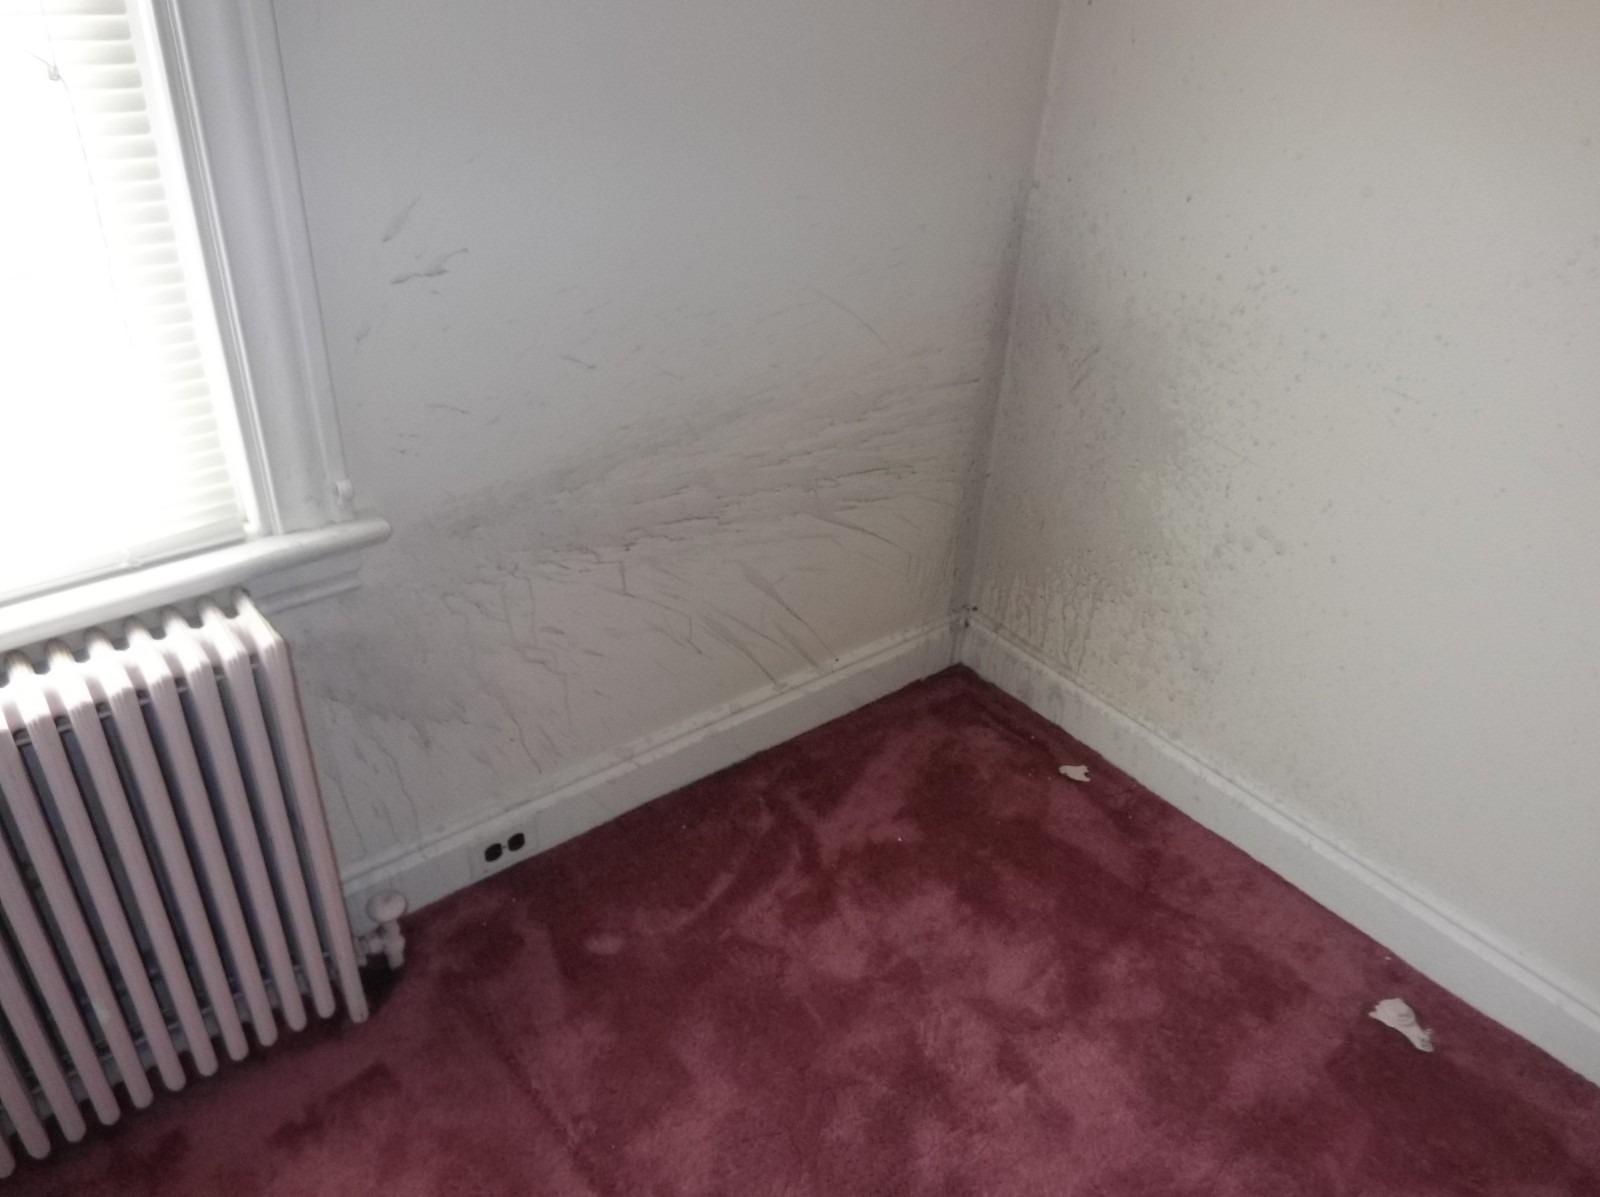 Responding to a water loss job after a radiator exploded.